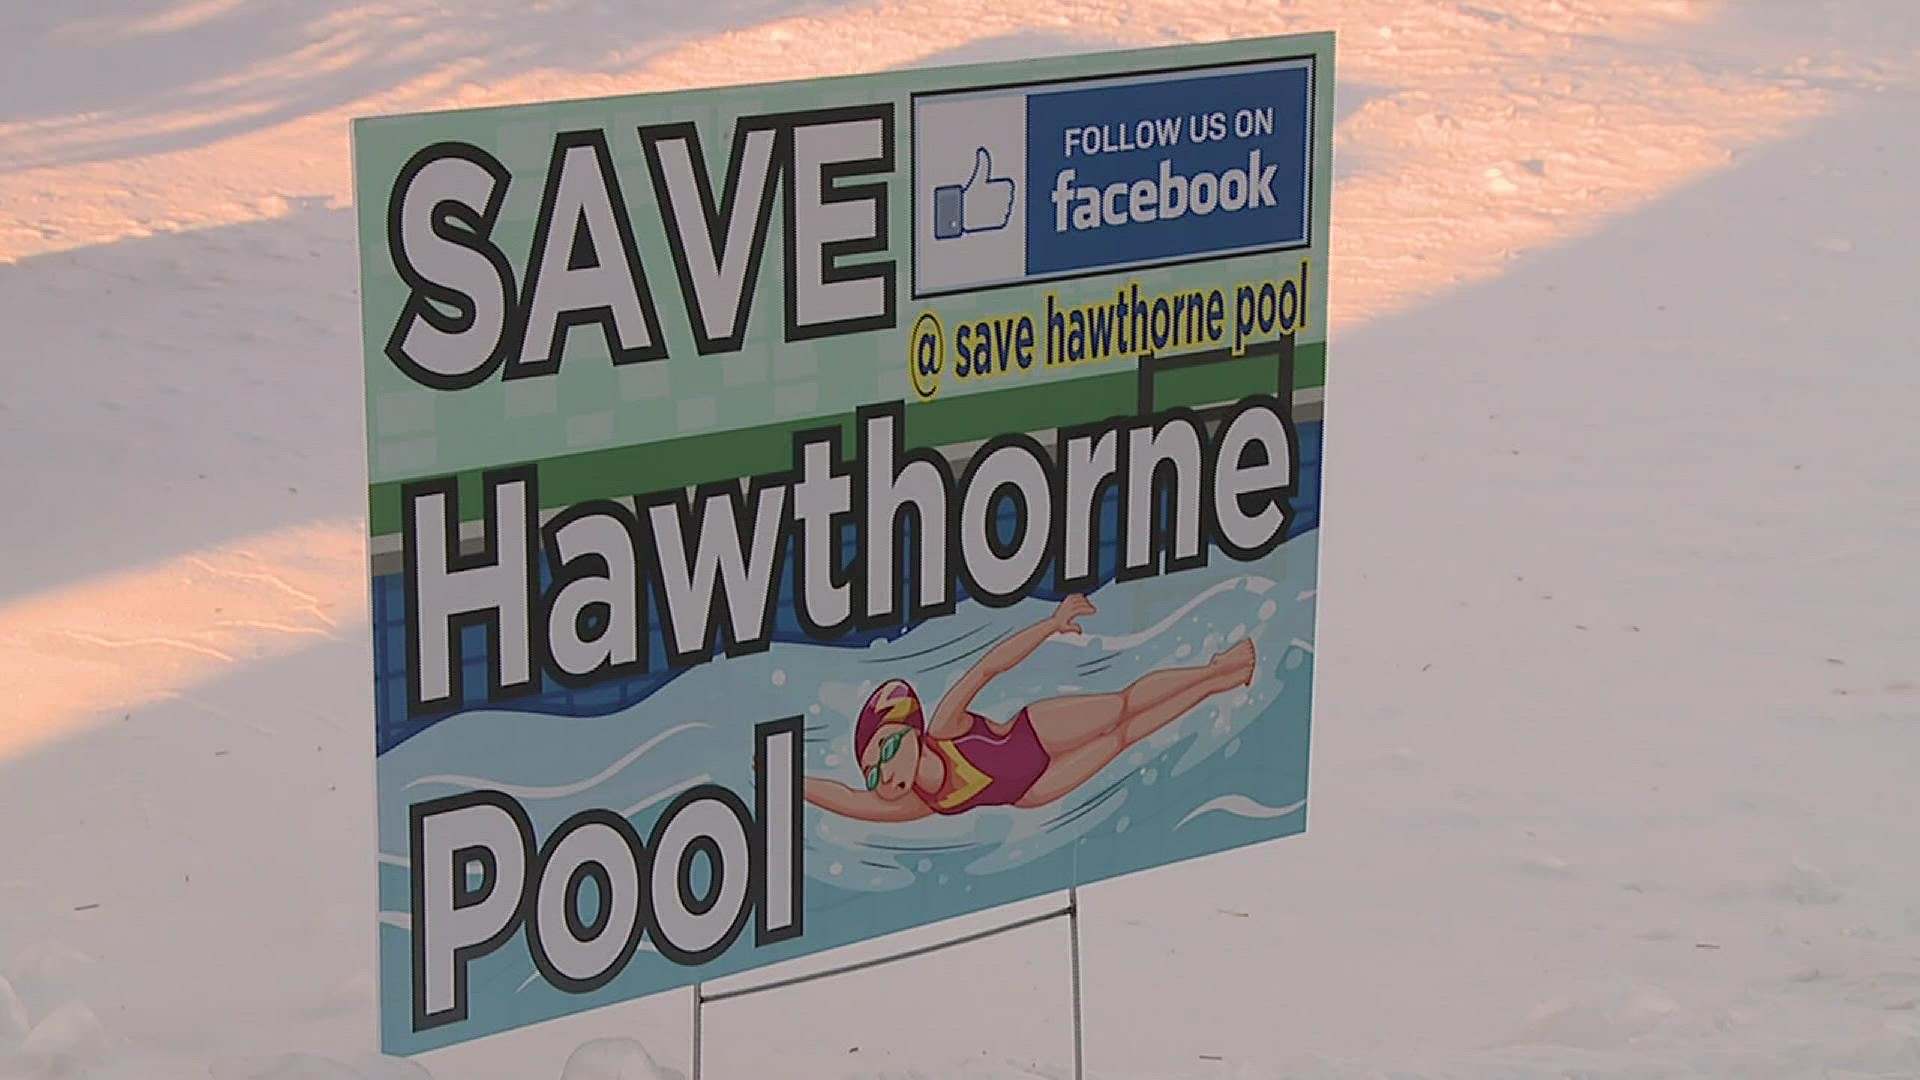 Galesburg City Council is considering closing Hawthorne Pool, an 80-year-old public pool, but over 1,200 people have signed a petition asking for it to remain open.